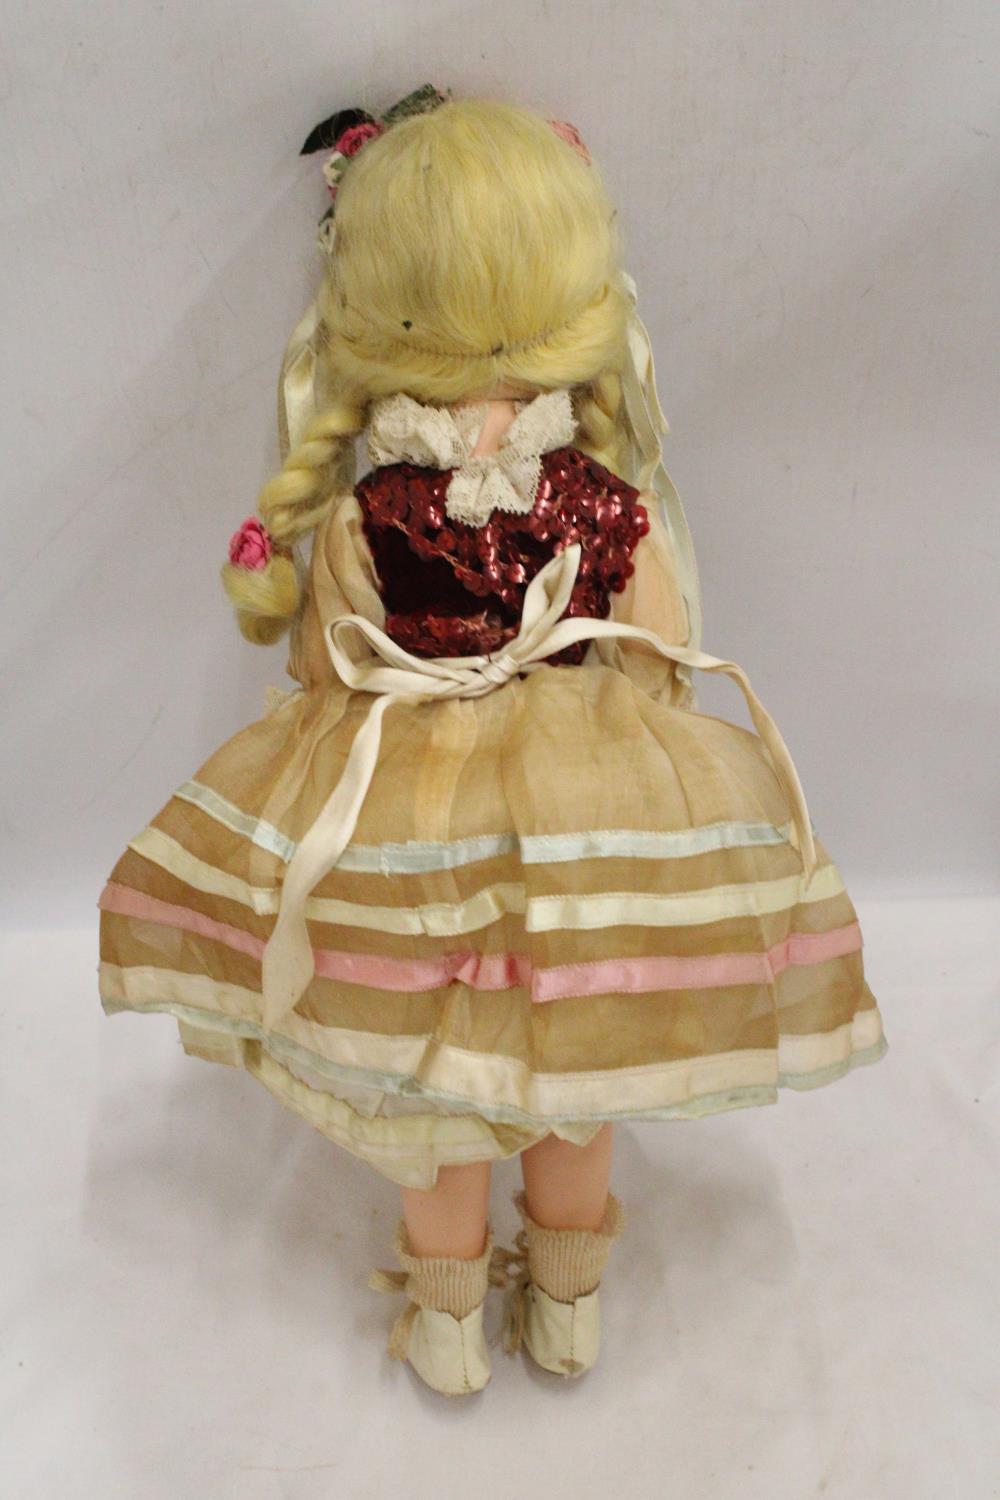 A VINTAGE DOLL WITH ORIGINAL COSTUME AND SLEEPY EYES - Image 3 of 3